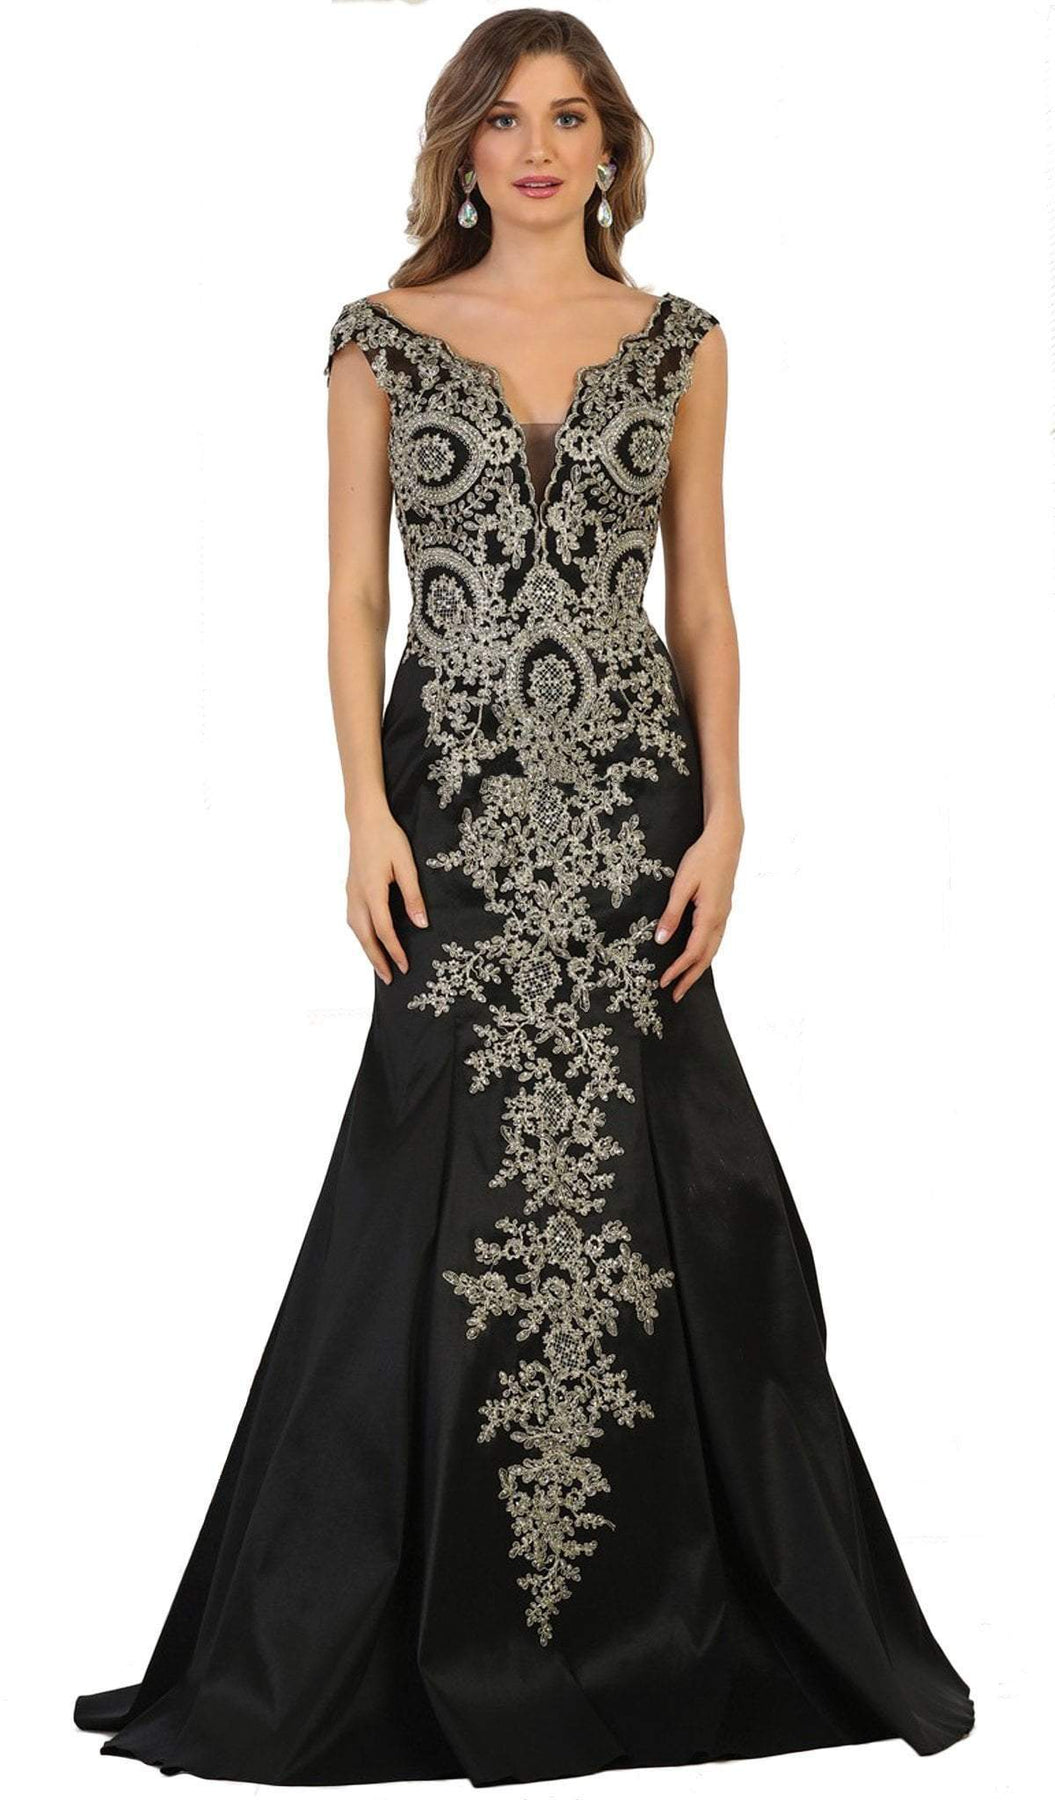 May Queen - RQ7602 Embellished Wide V-neck Sheath Mother of the Bride Gown Special Occasion Dress 4 / Black/Gold